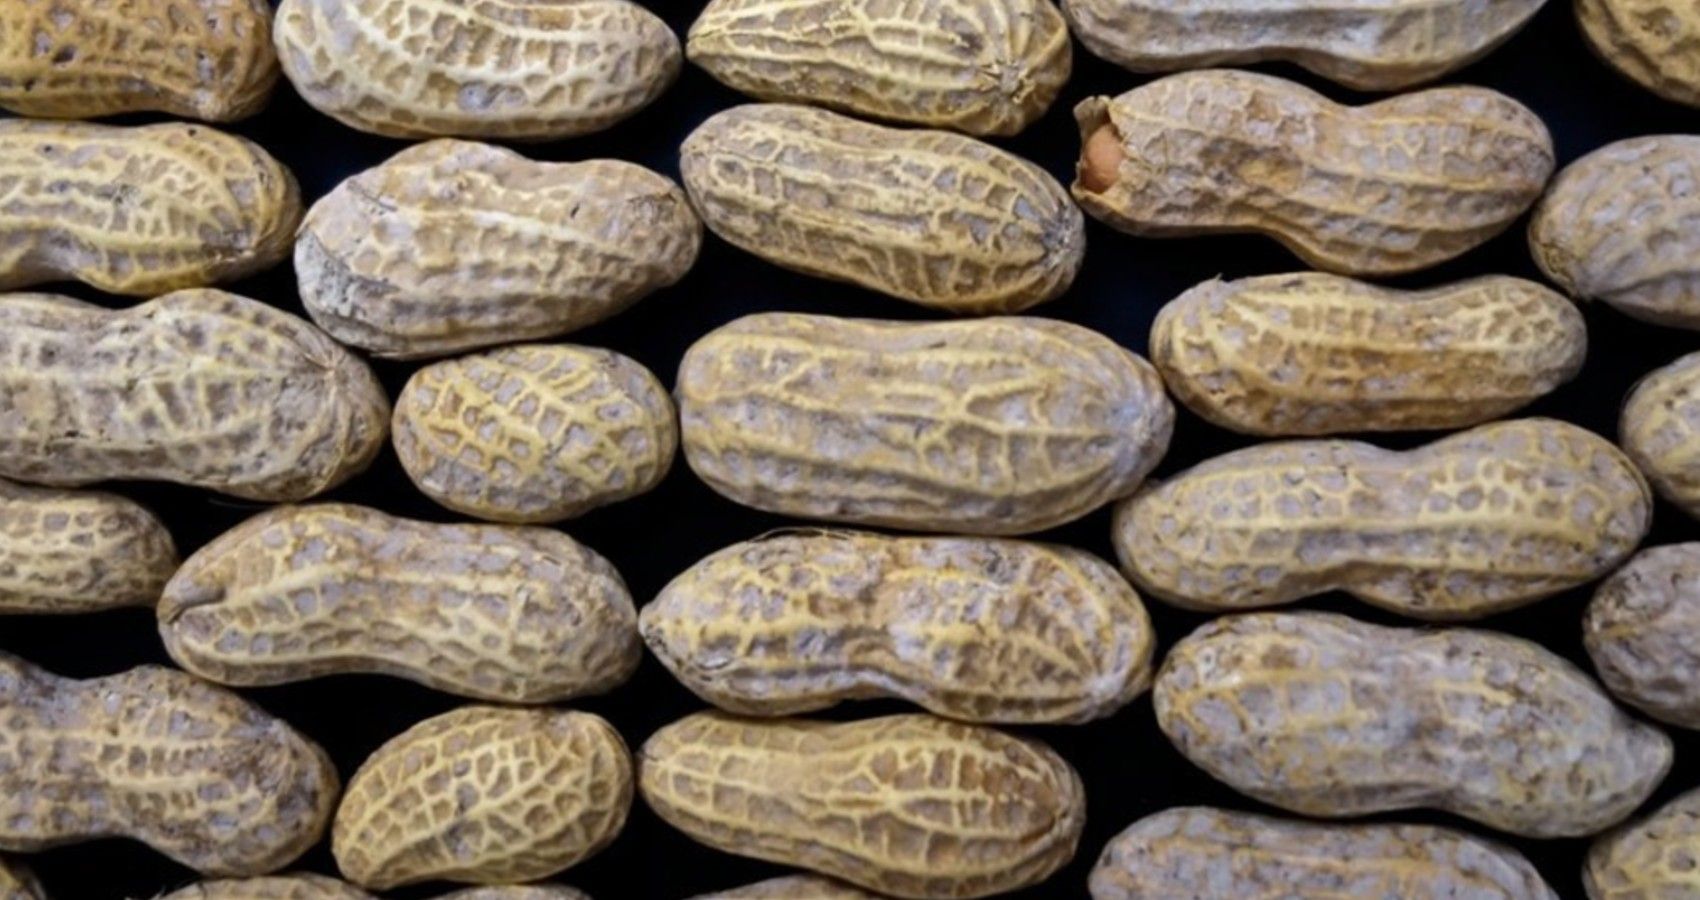 A large collection of shelled peanuts